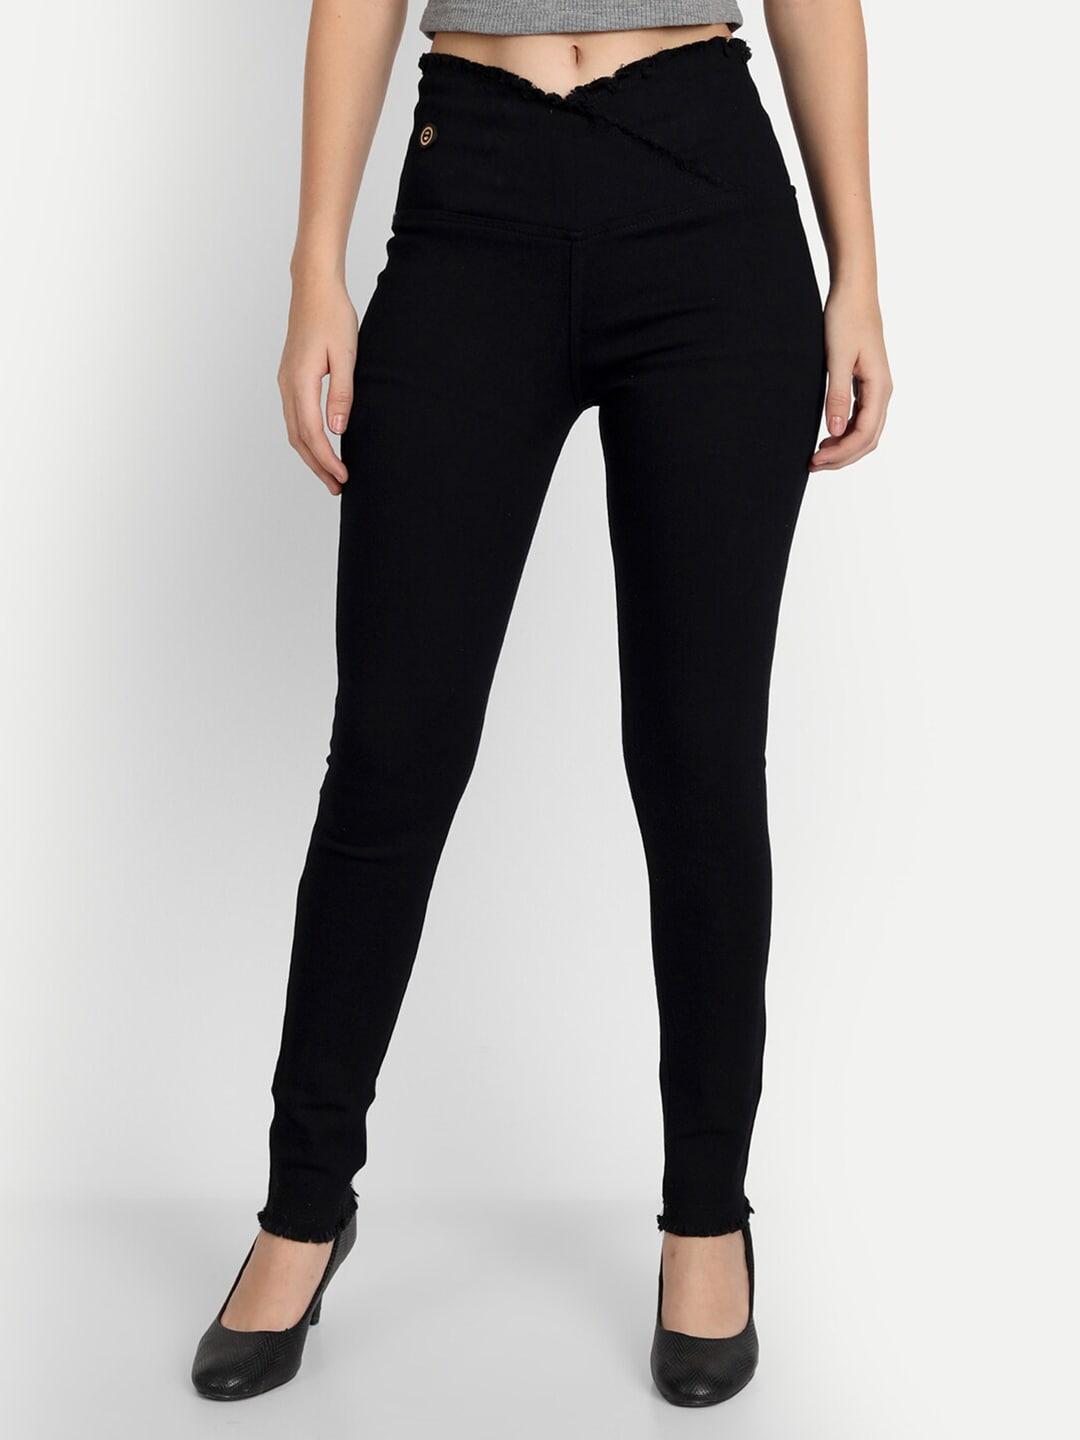 angelfab-women-cotton-mid-rise-jeggings